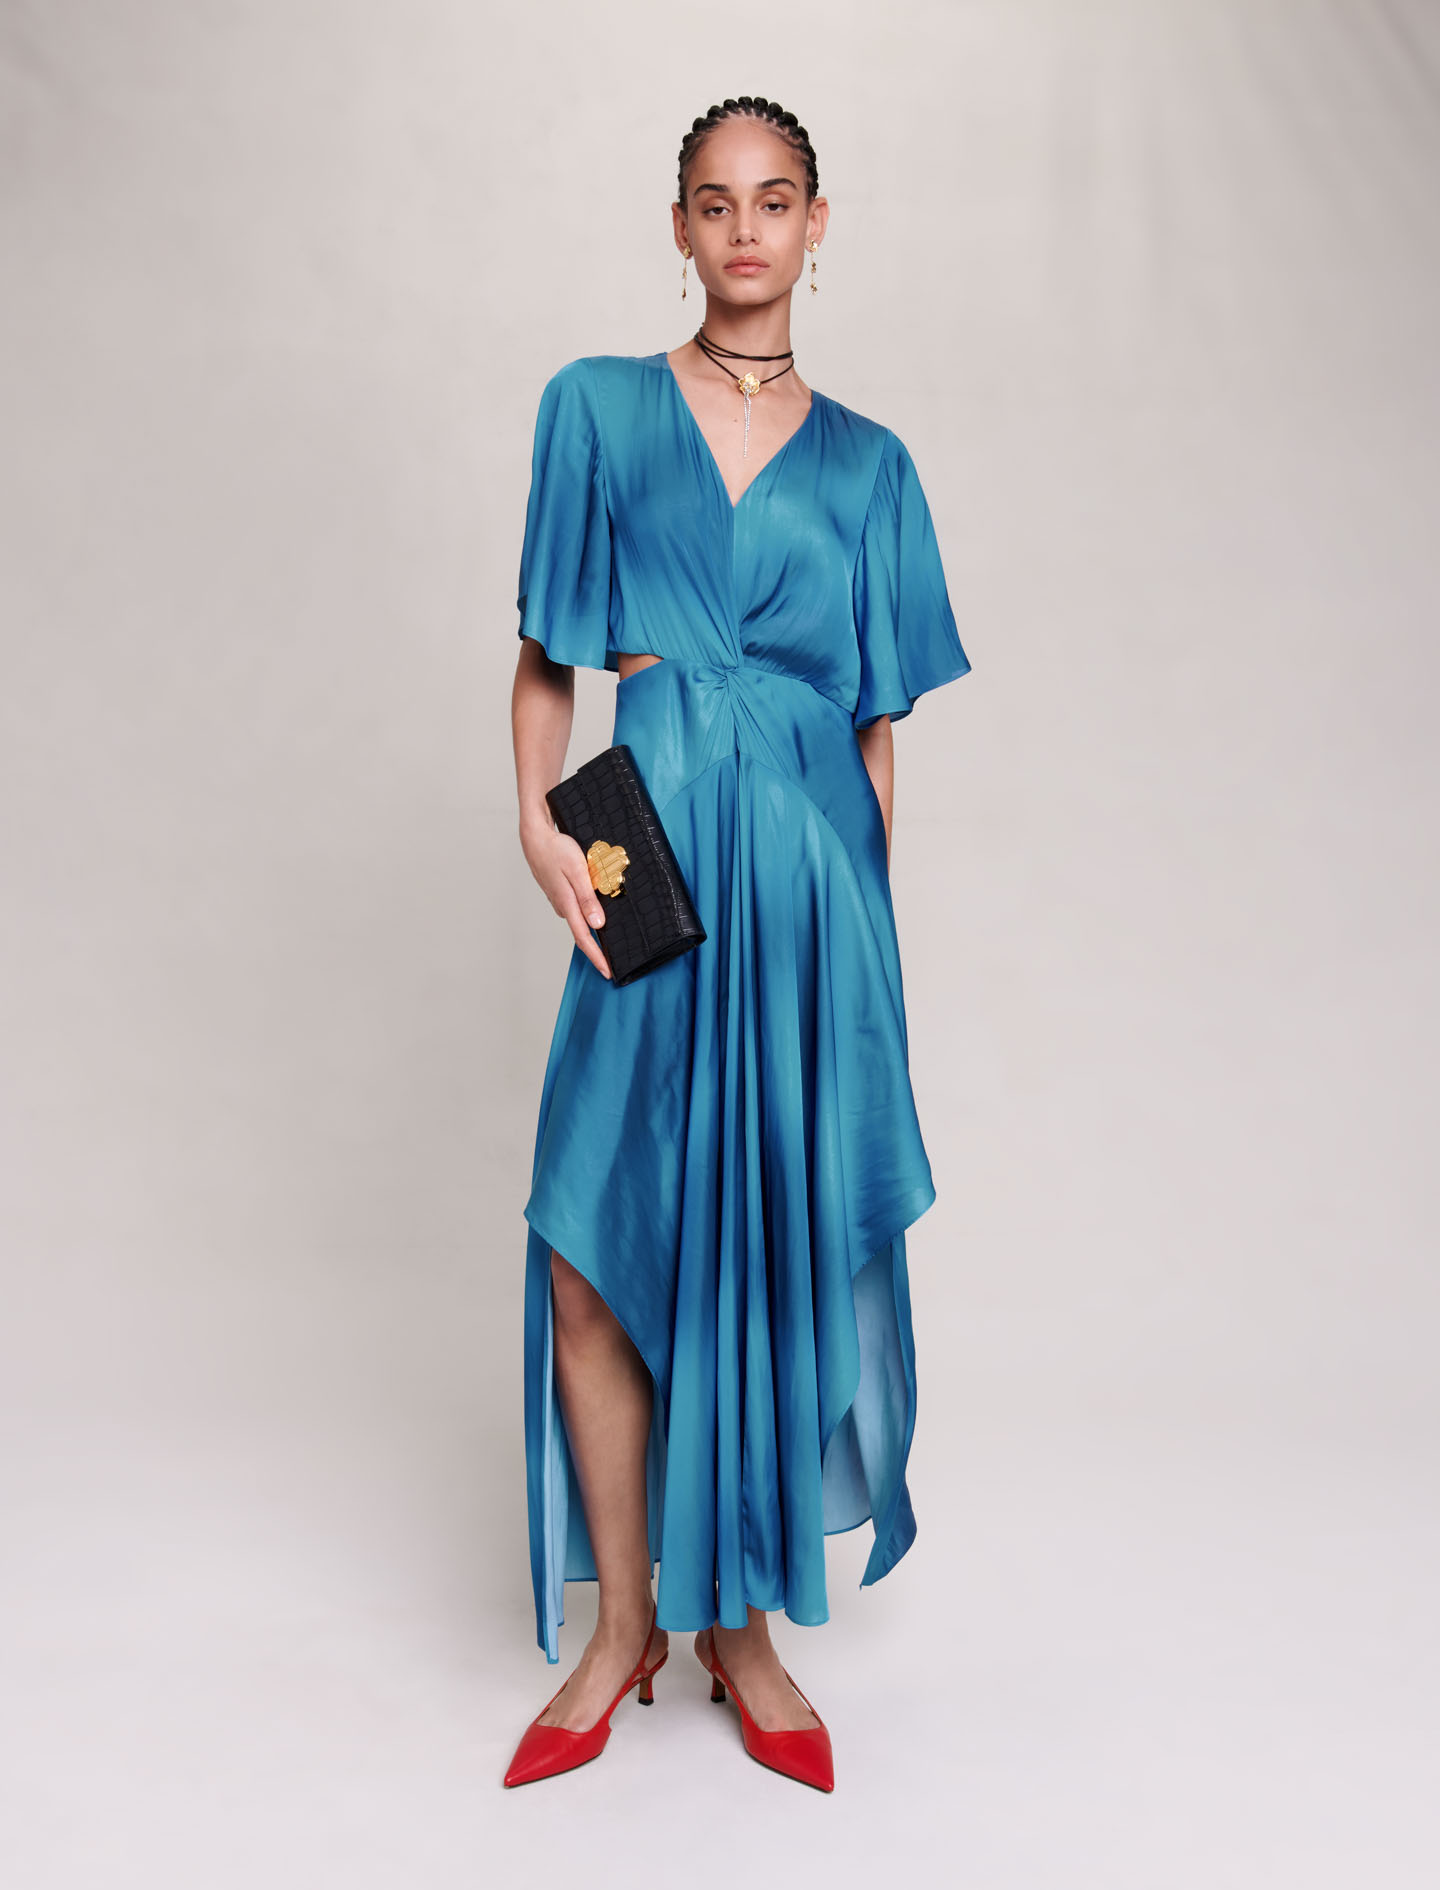 Maje Woman's polyester Satin-look maxi dress for Fall/Winter, in color Blue / Blue